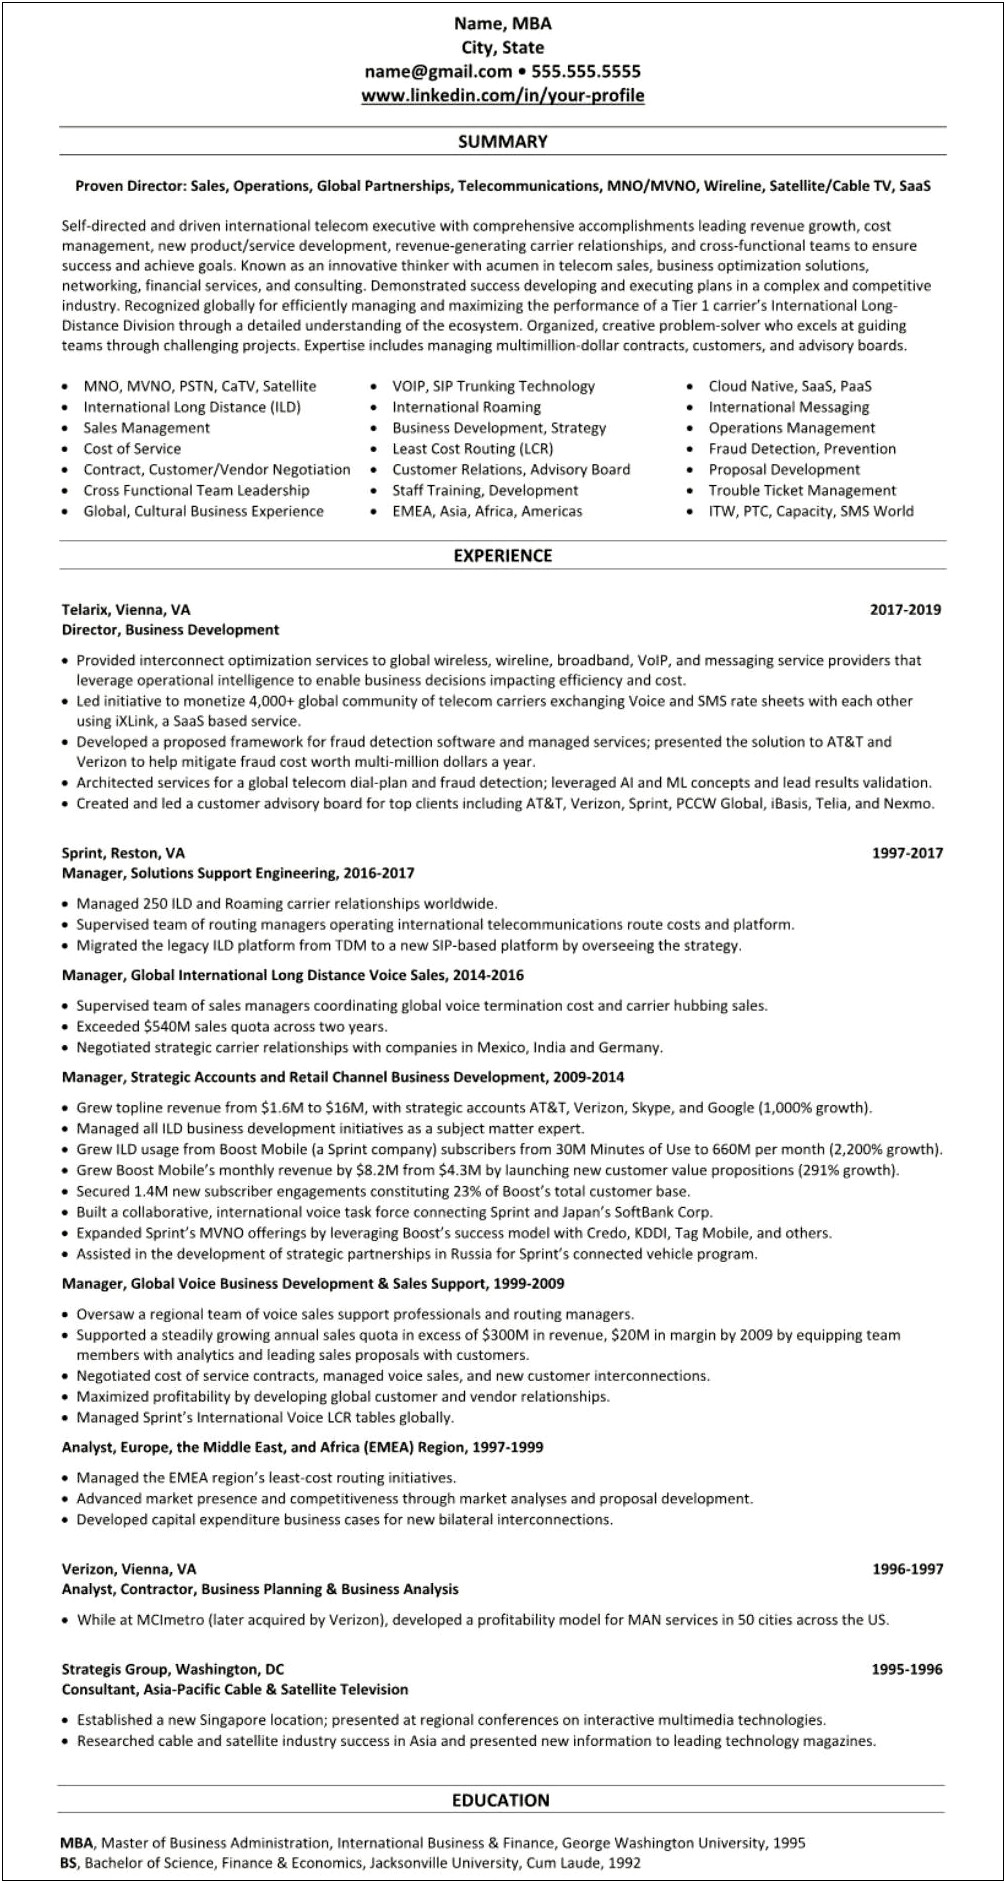 Sample Resume For Sales Manager In Telecom